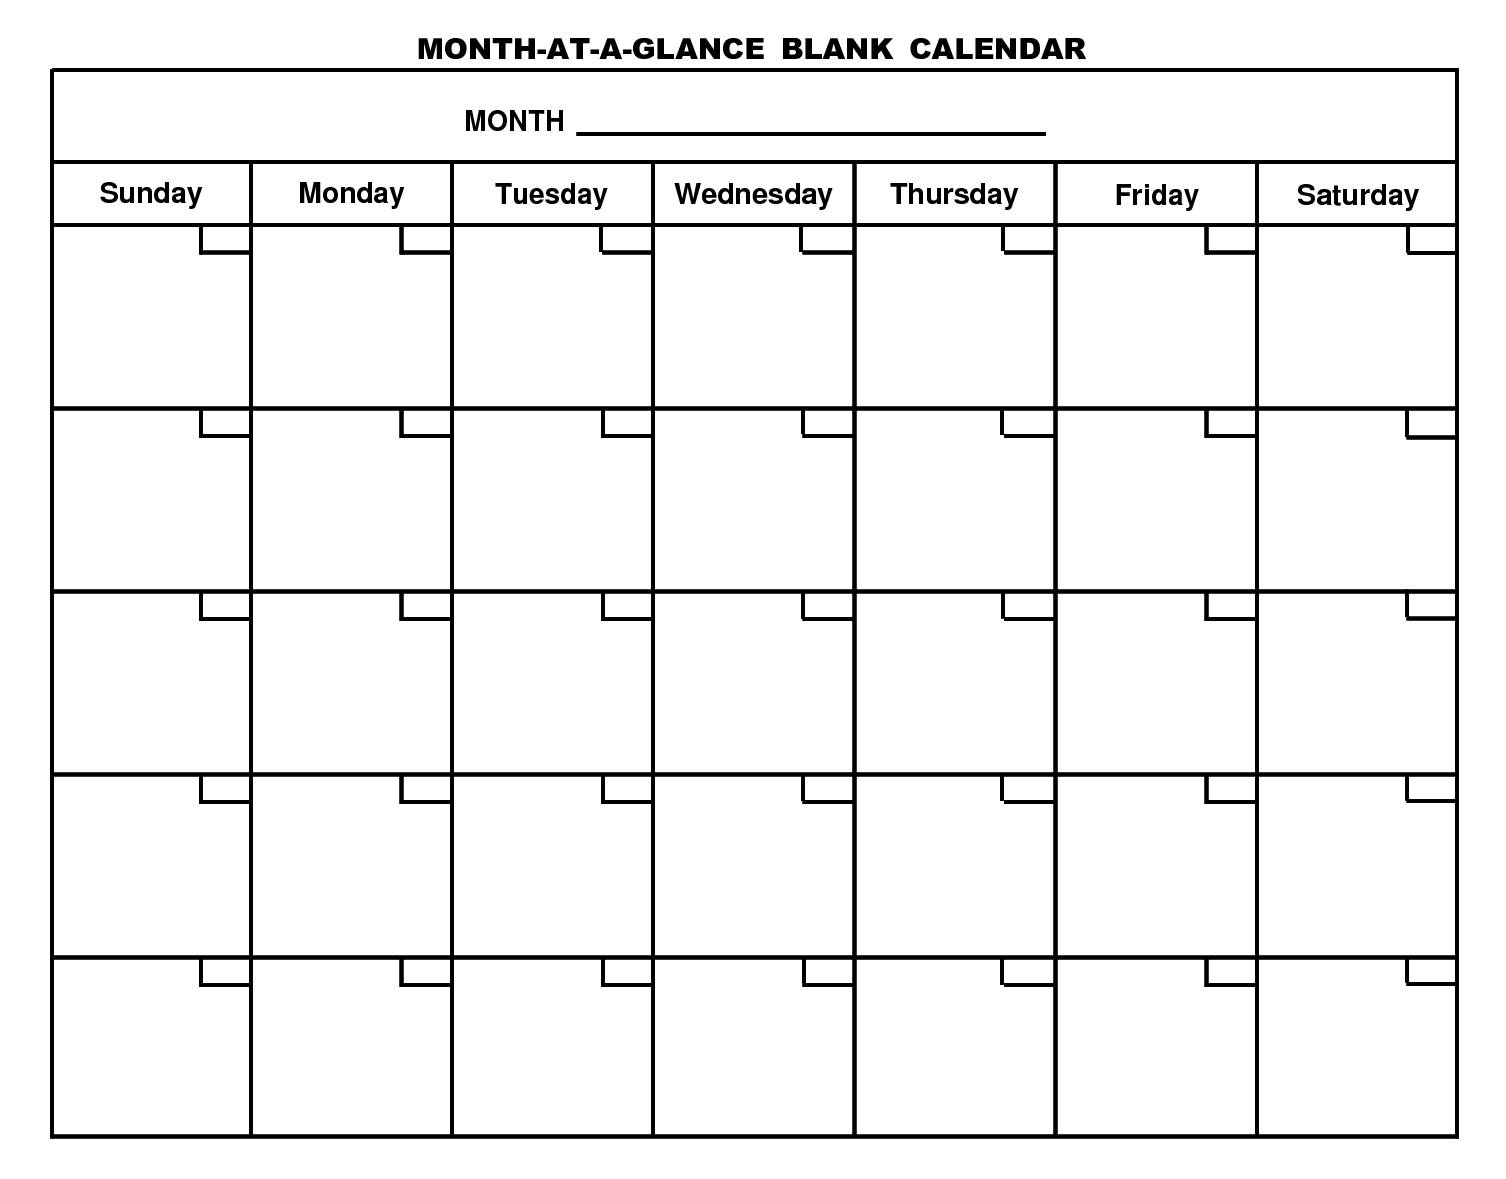 Pin By Stacy Tangren On Work | Blank Monthly Calendar-Blank Month At A Glance Printable Calendar